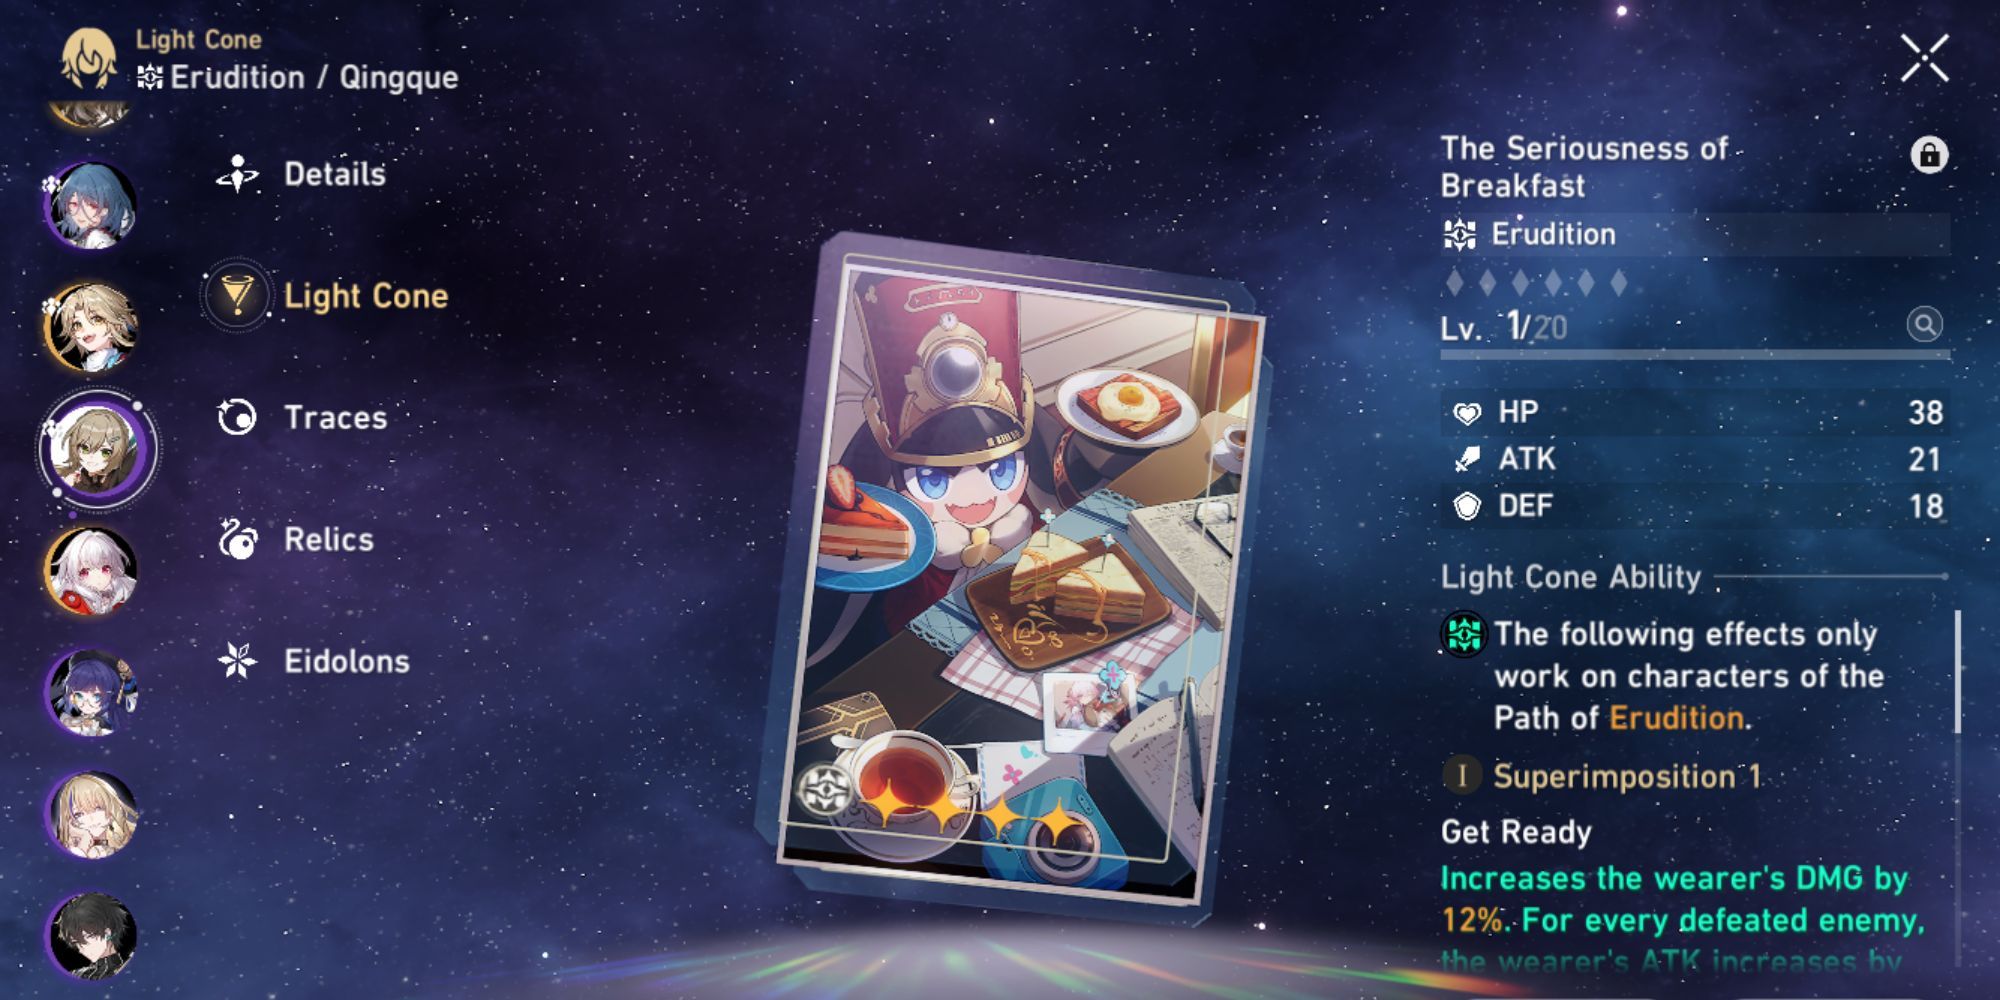 Honkai: Star Rail - Qingque's Light Cone in the character screen